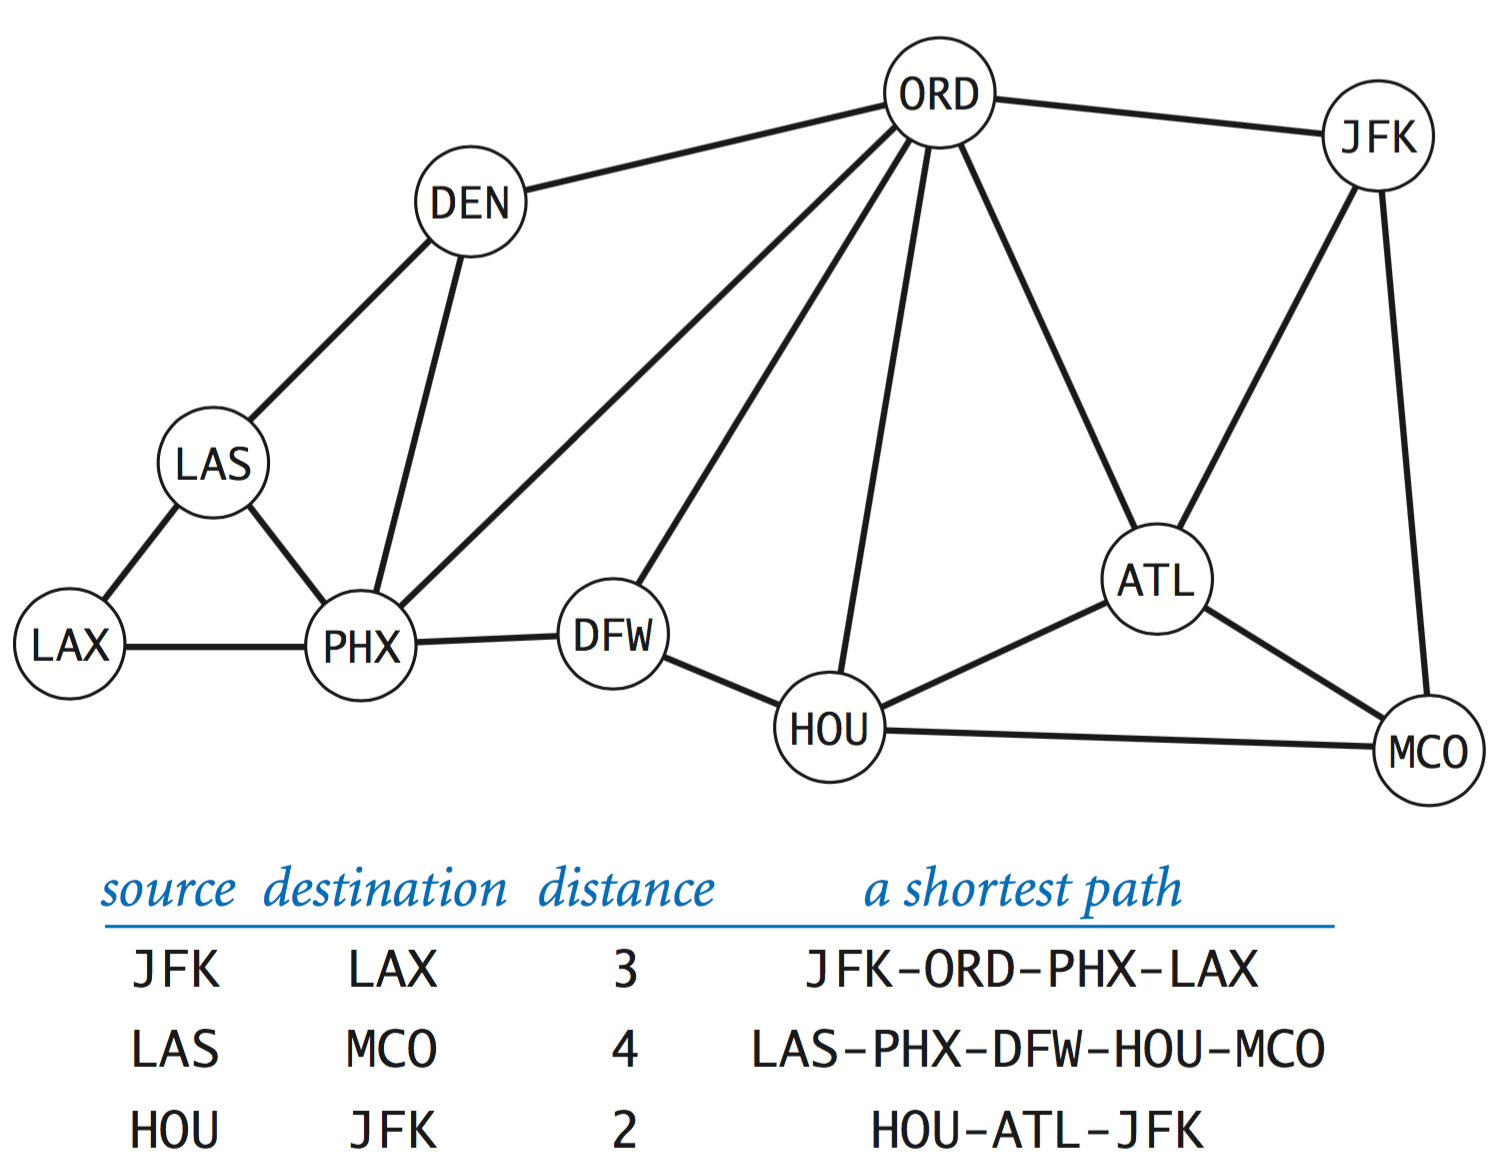 Shortest paths in a transportation graph